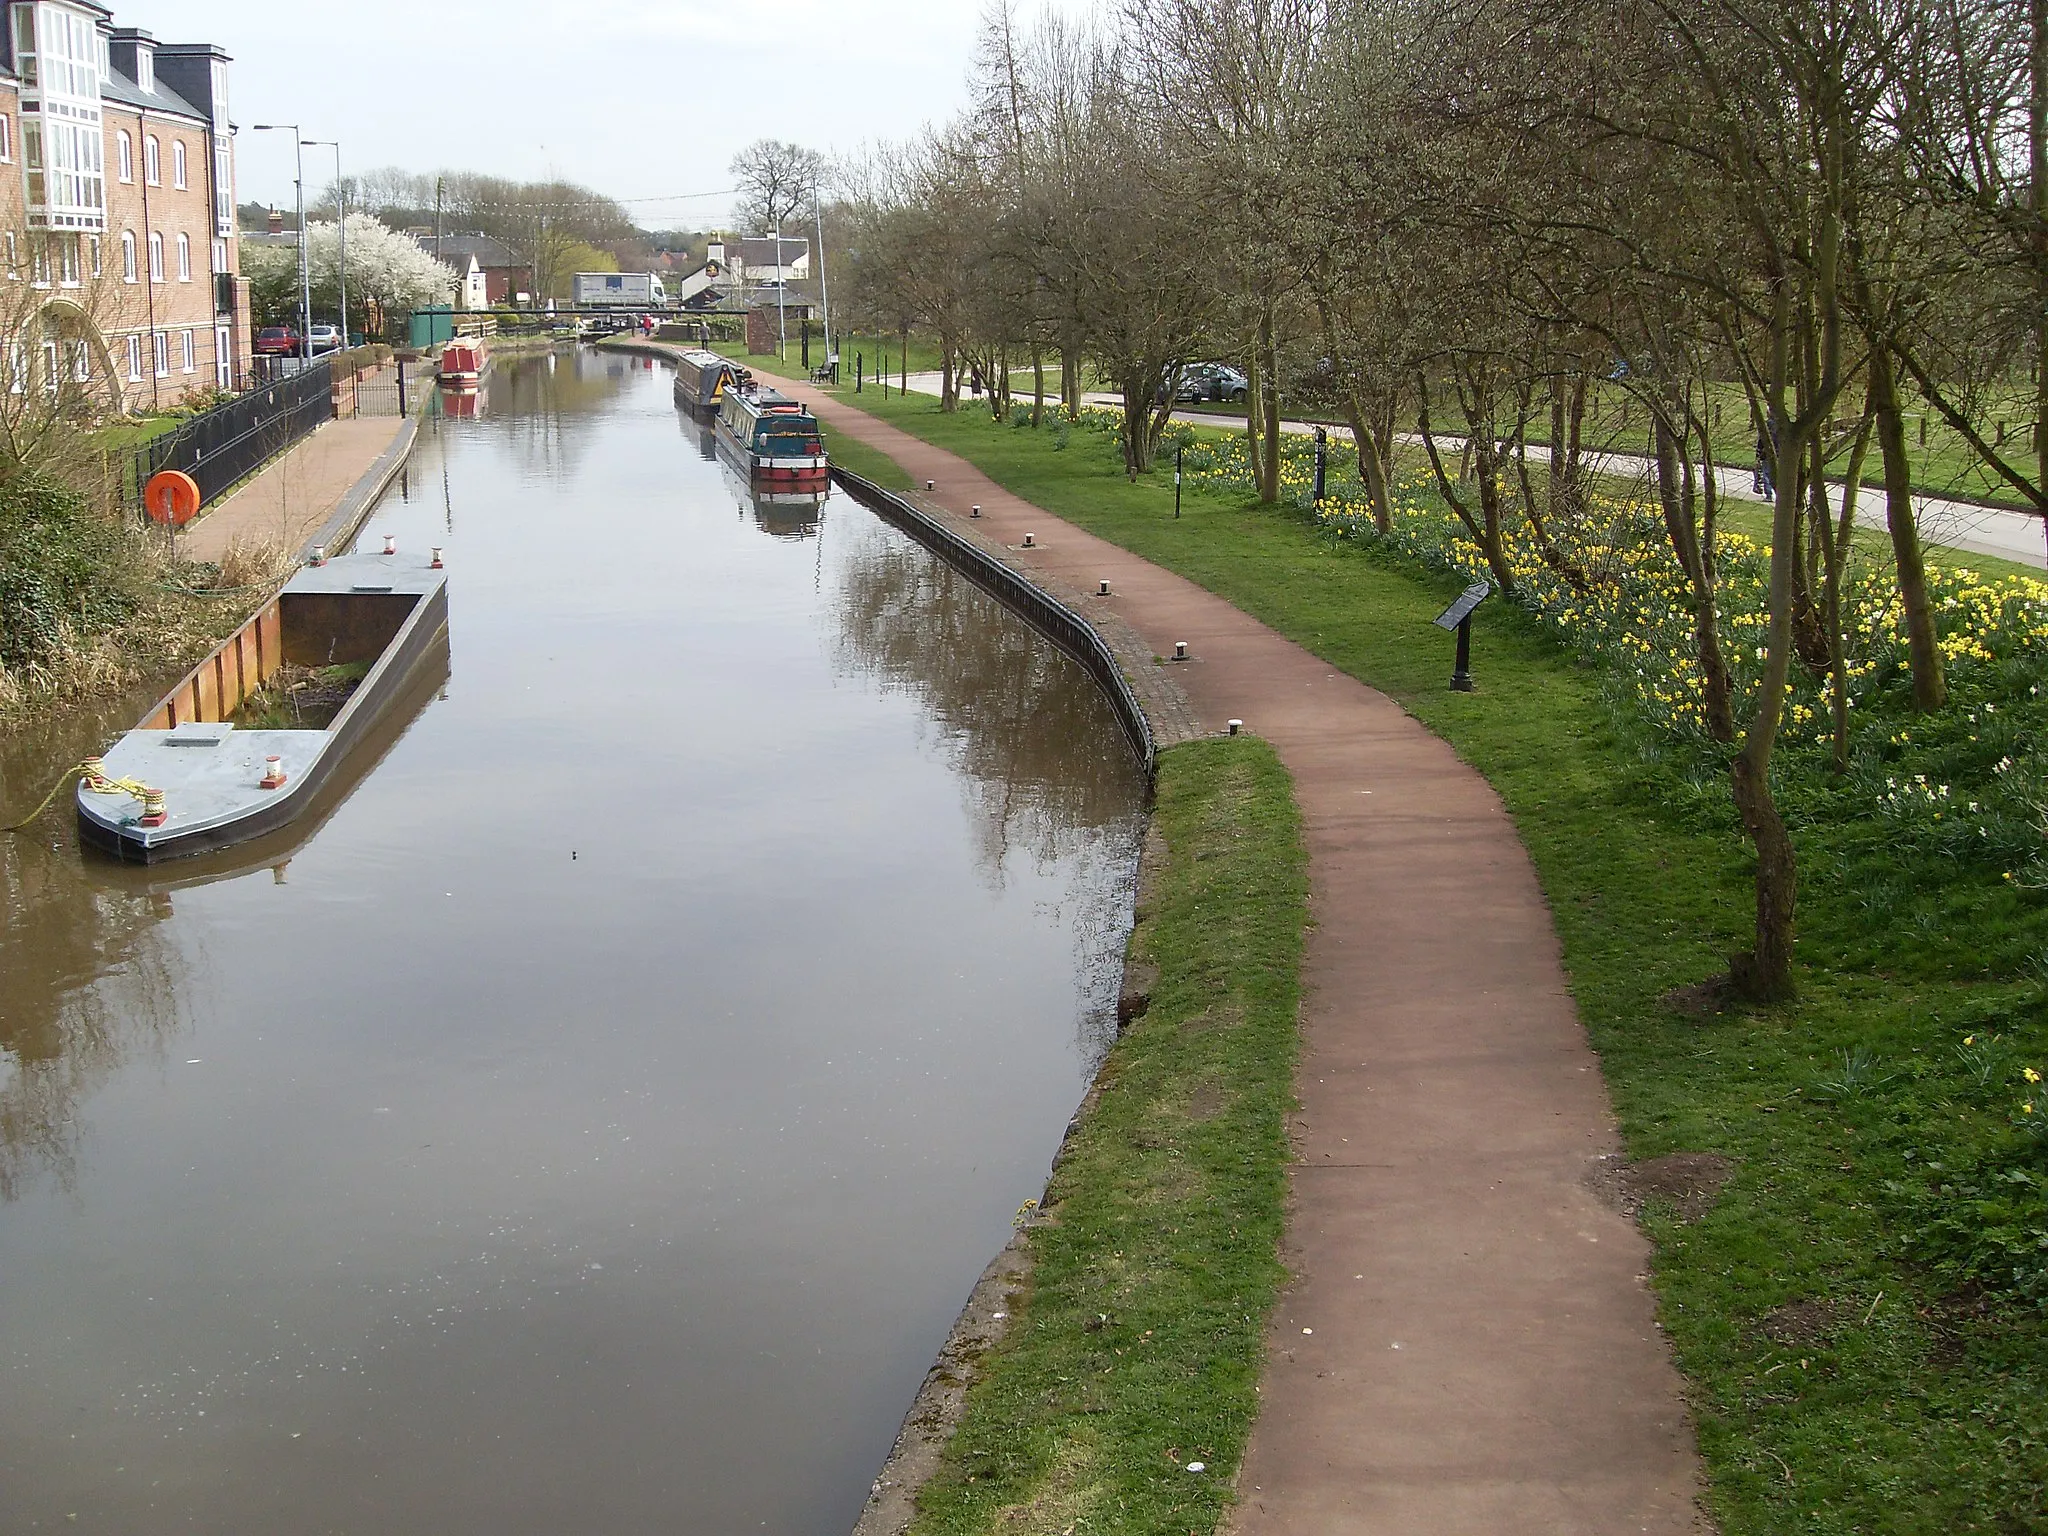 Photo showing: The Trent and Mersey canal in Stone in the Staffordshire in England.